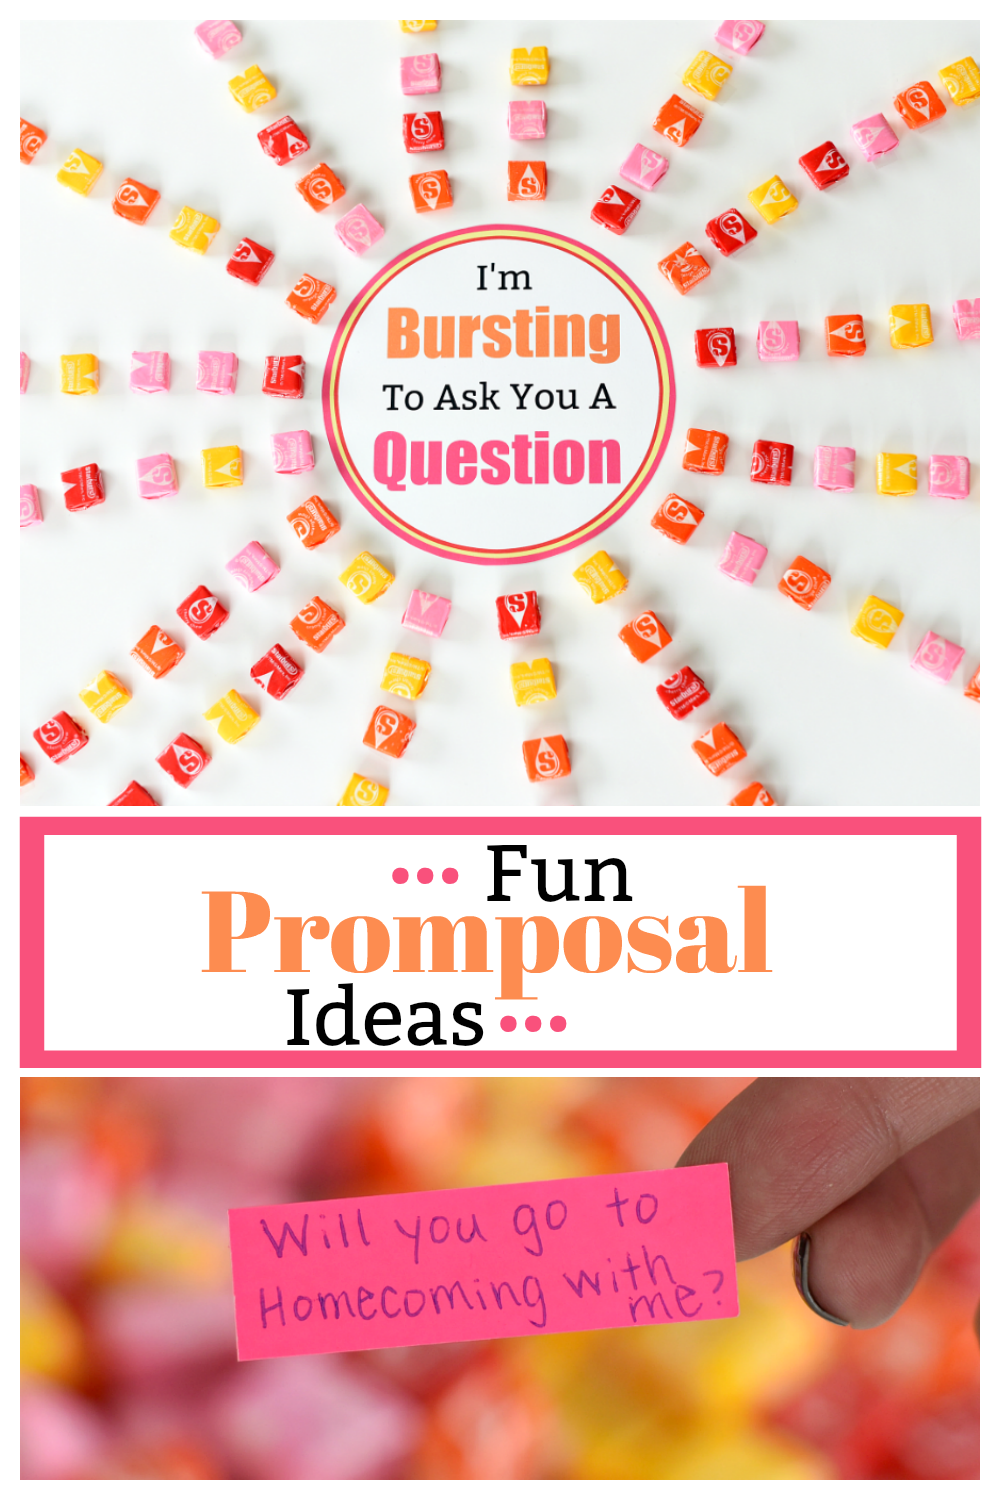 Fun Prom and Homecoming proposal idea. Ask your date to big dance with this fun Starburst promposal. #Prom #homecoming #promposal #promproposal #danceinvitation